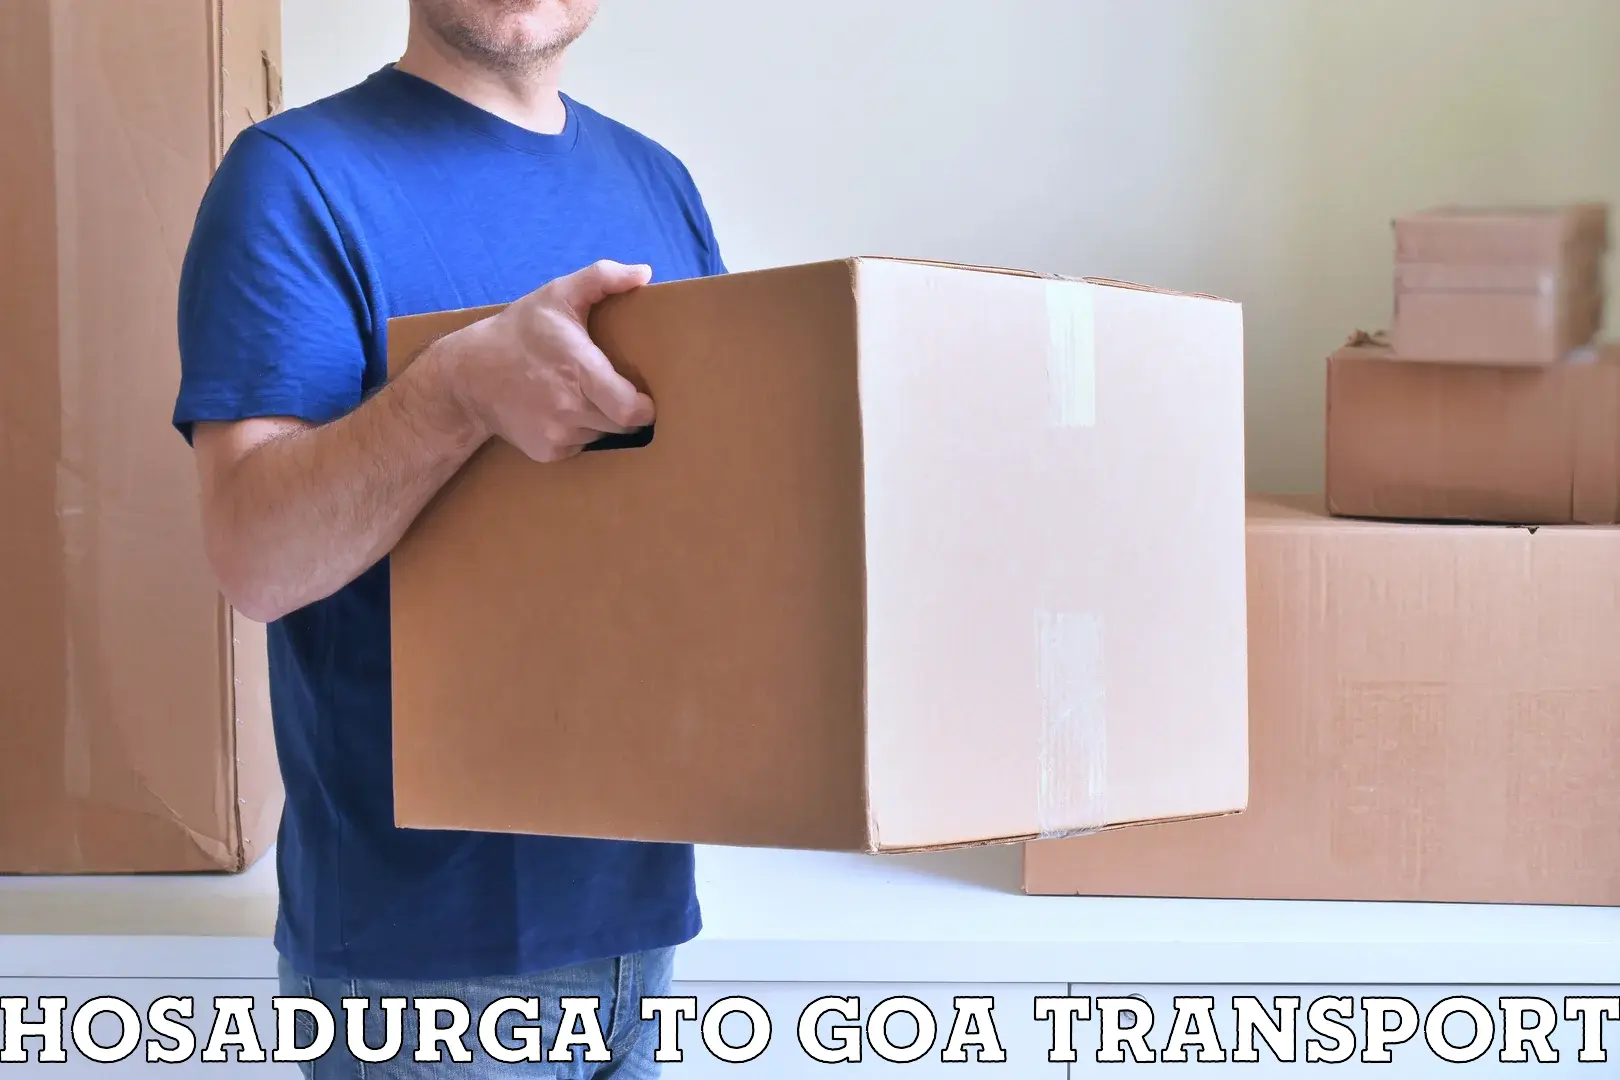 Transport bike from one state to another Hosadurga to South Goa